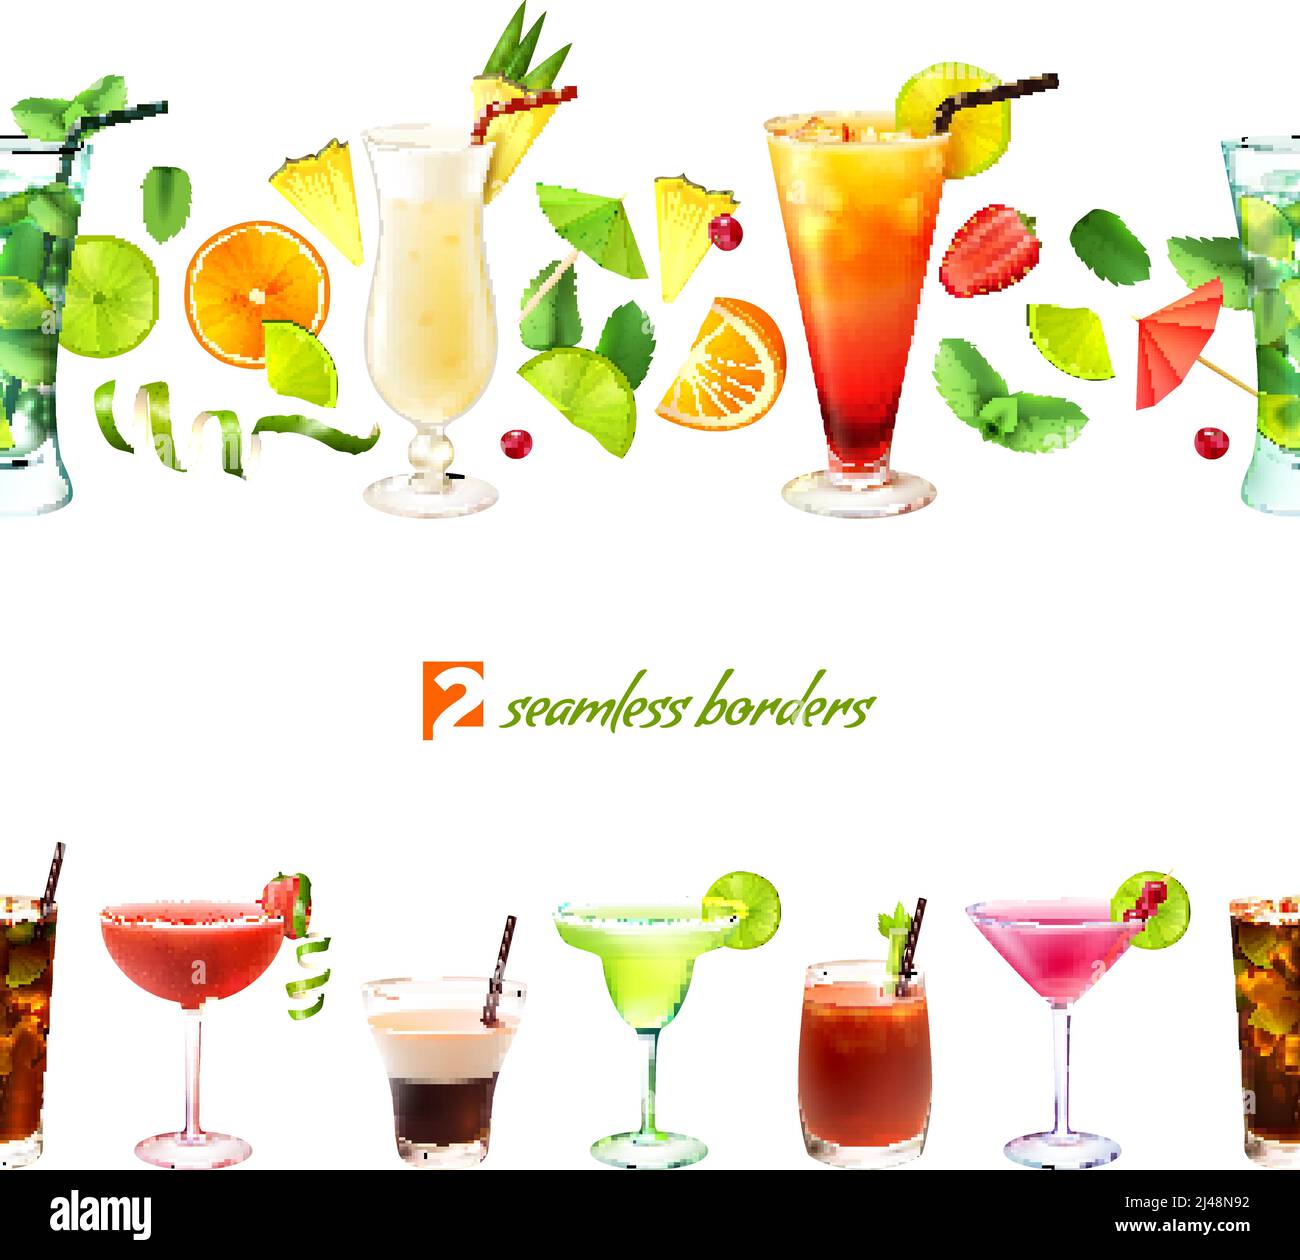 Cocktail seamless border with drinks in glasses and decoration vector illustration Stock Vector